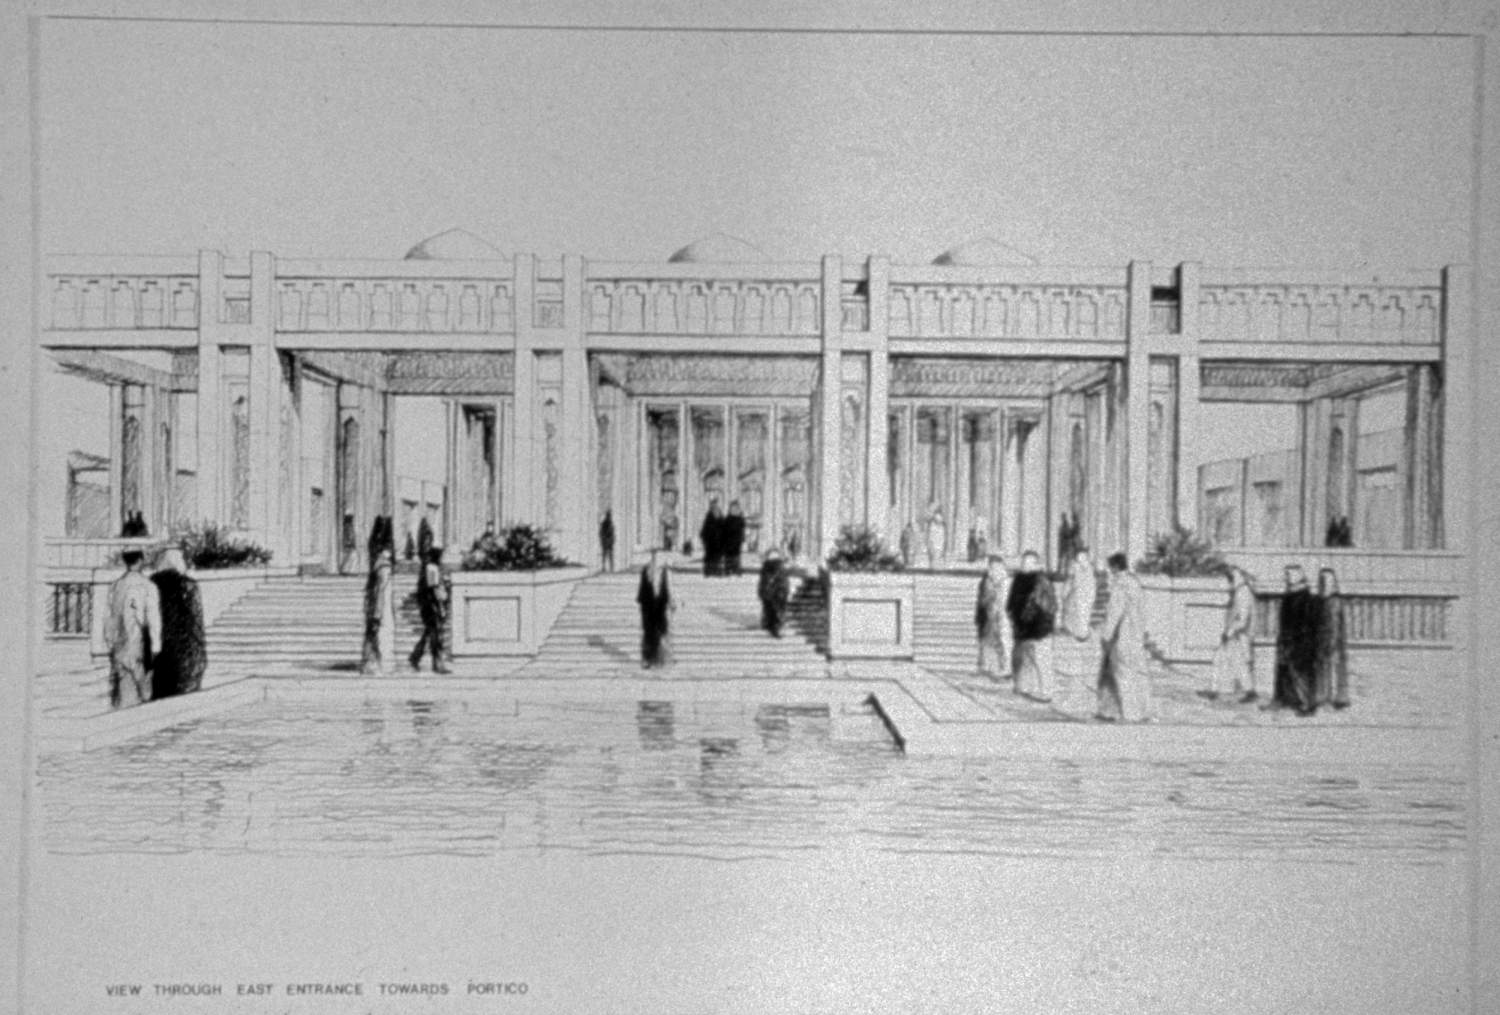 <p>Drawing showing view through east entrance toward portico</p>